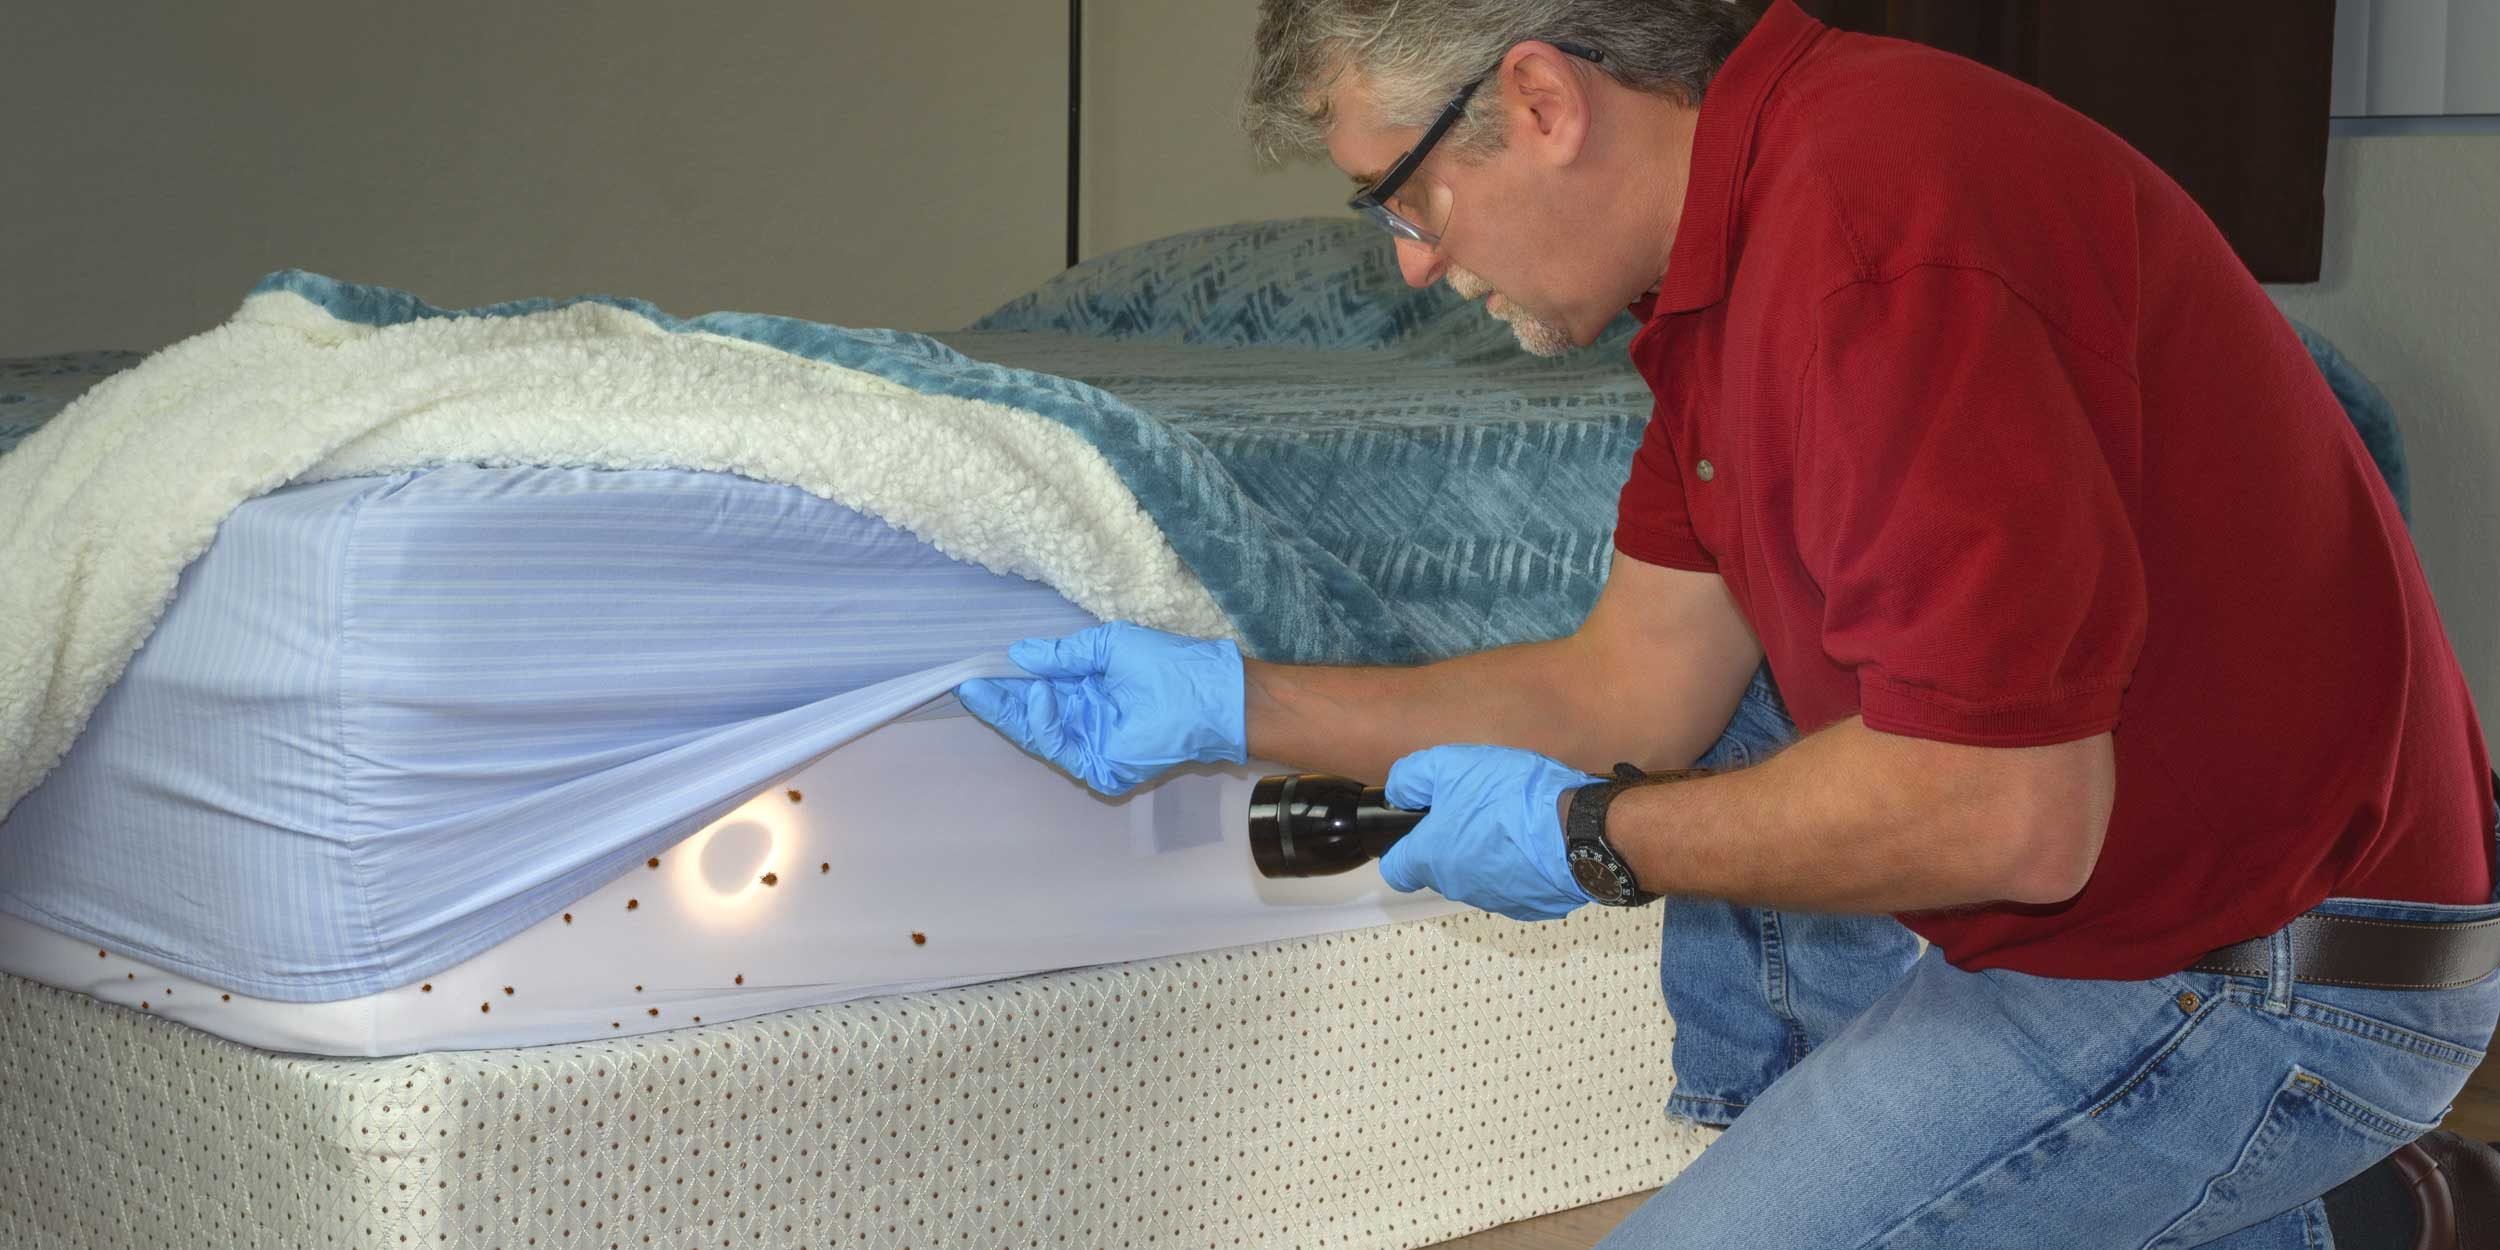 How Do Bed Bugs Spread In An Apartment Building